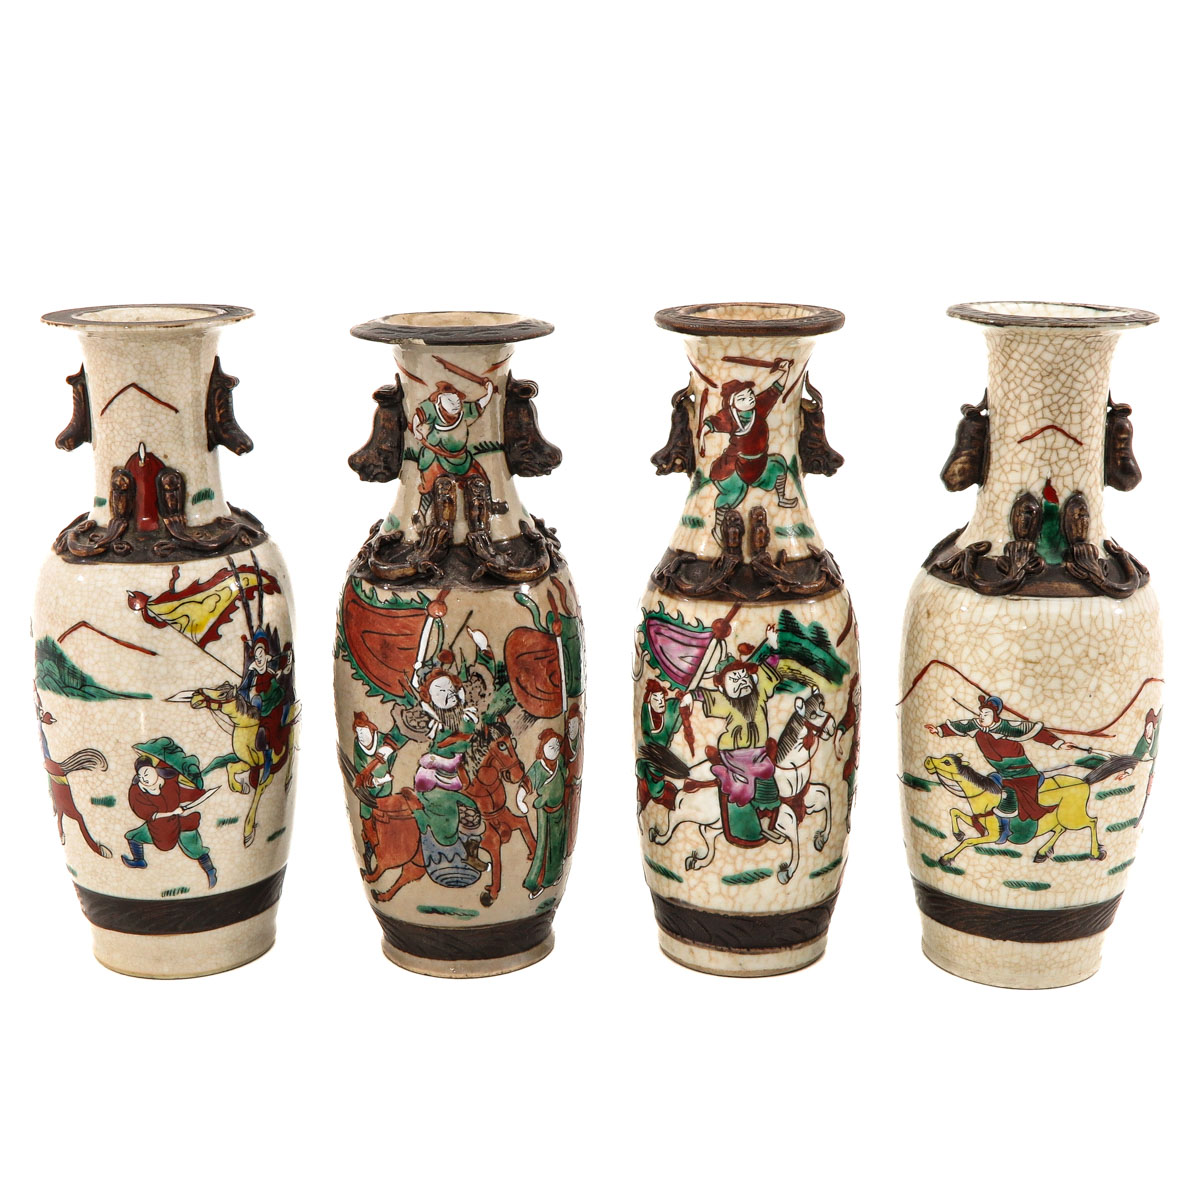 A Collection of 4 Nanking Vases